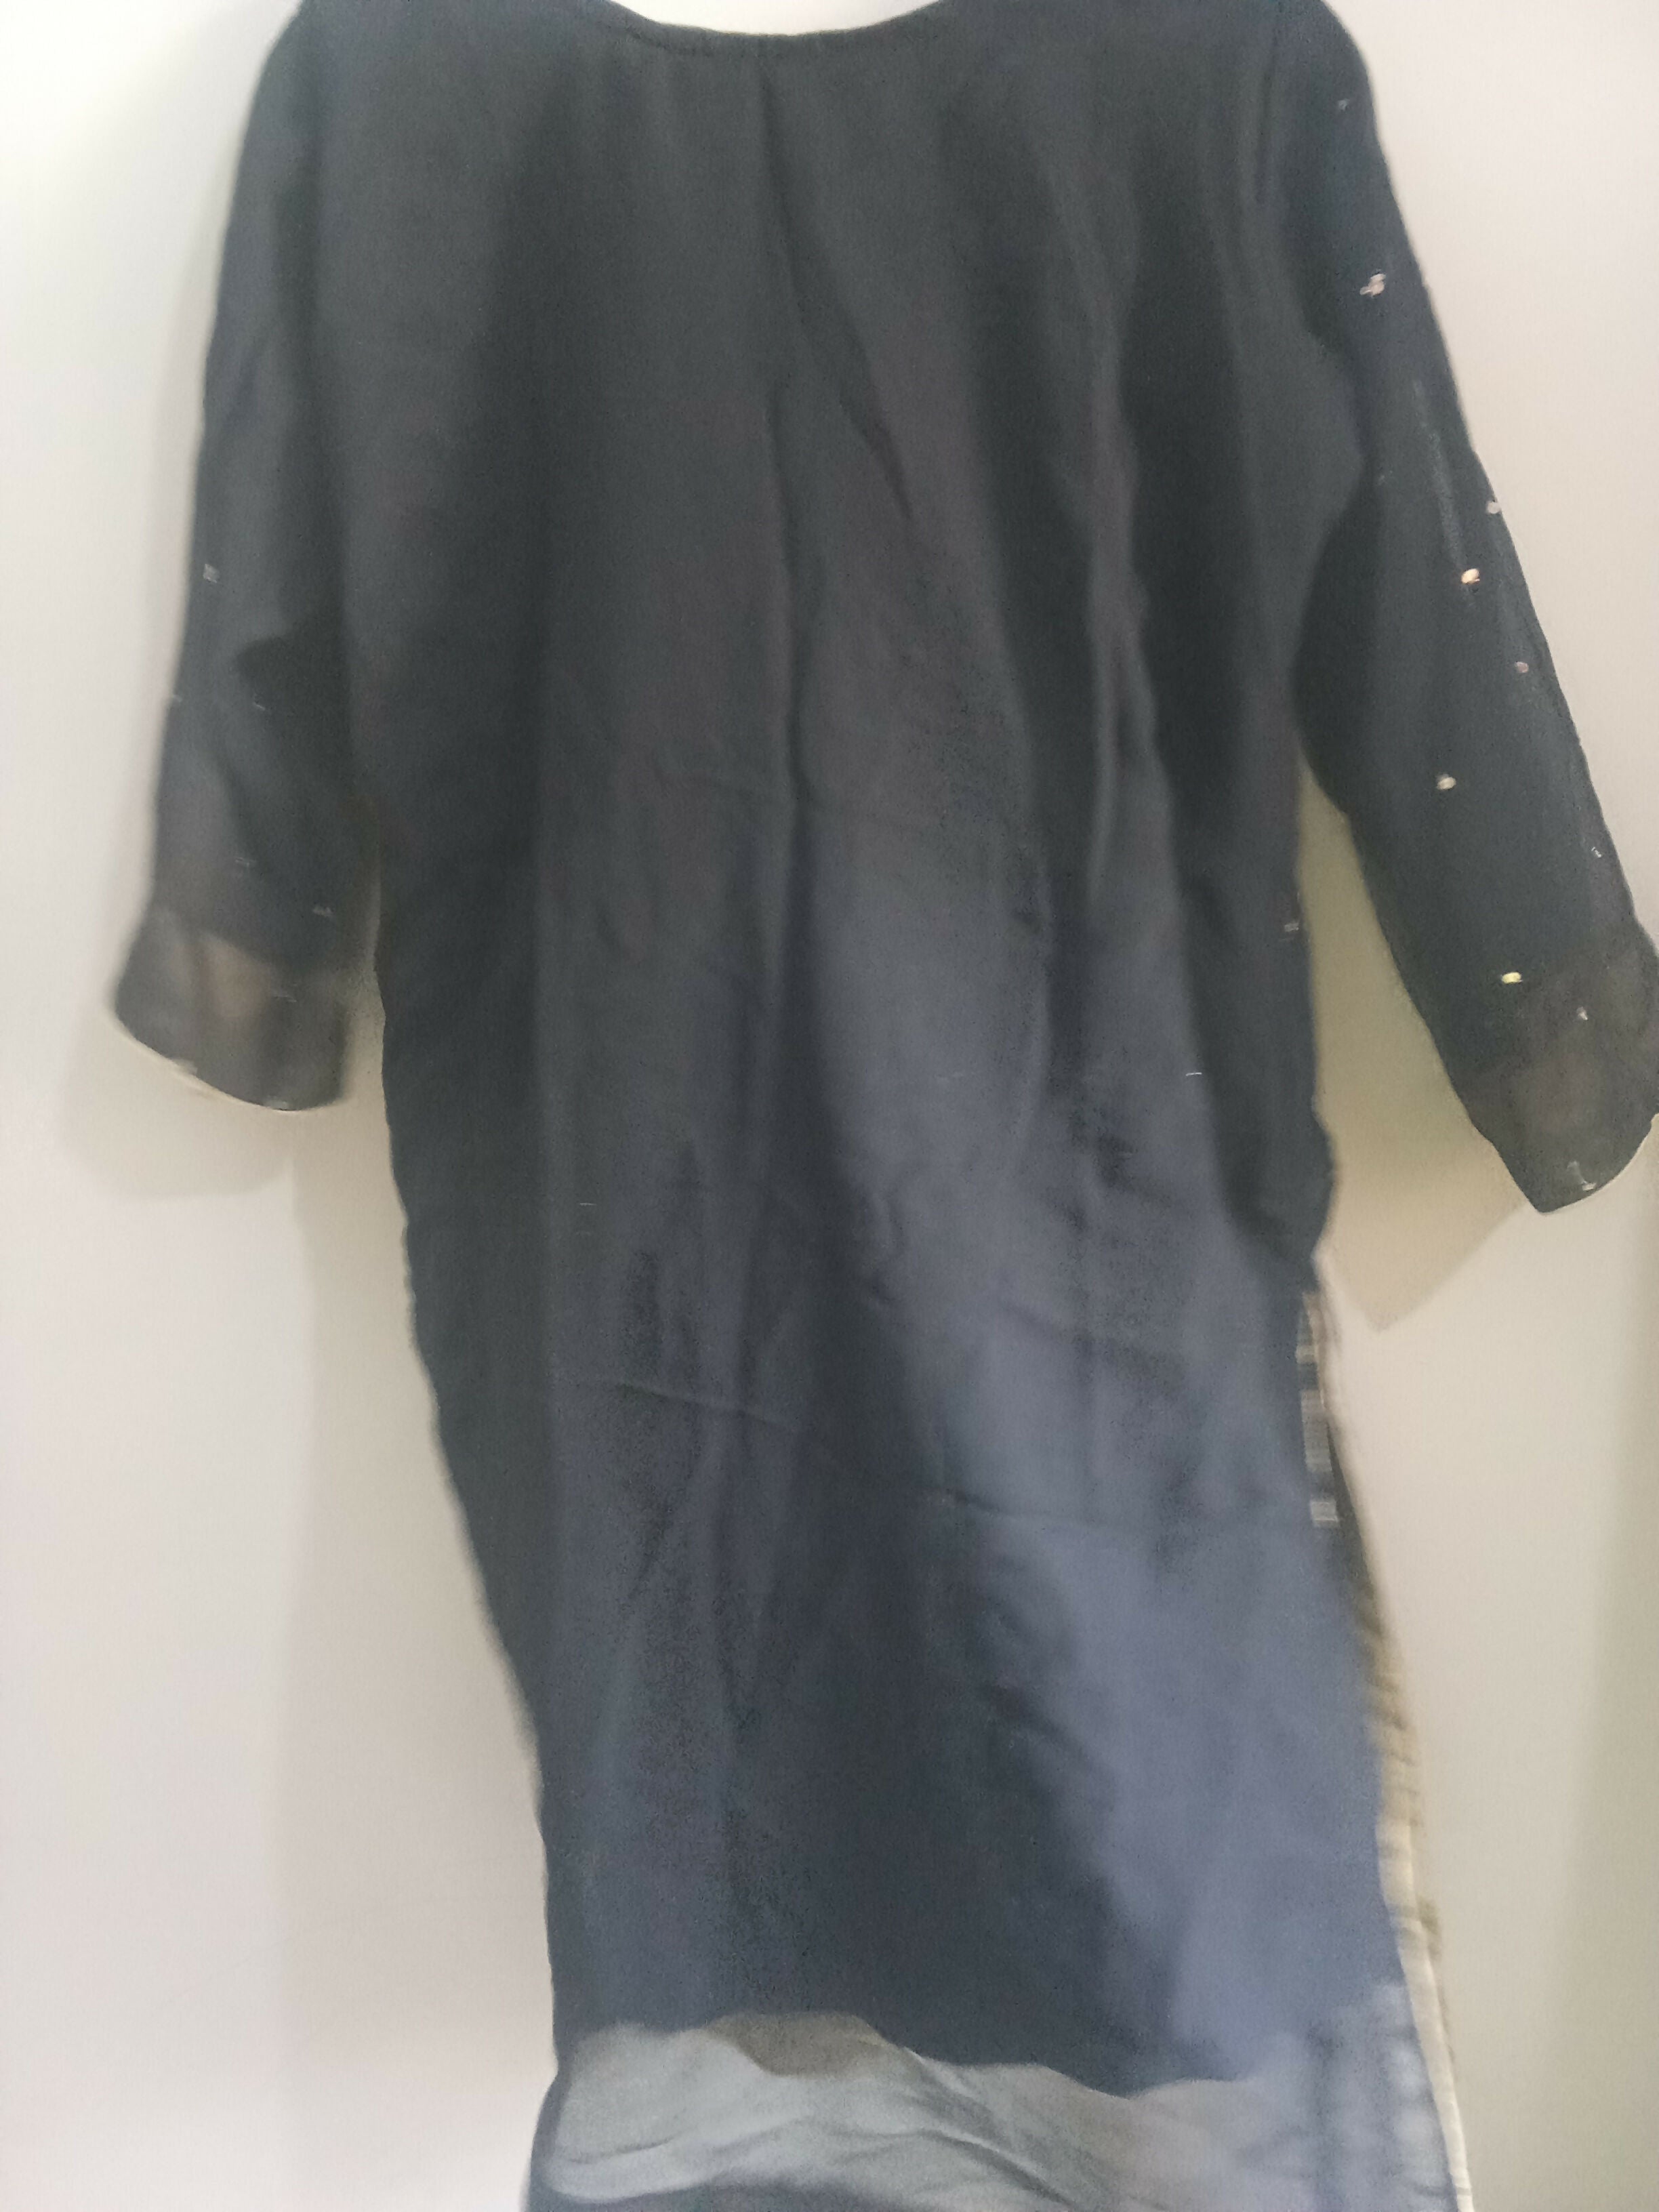 Black Chiffon Formal Suit | Women Locally Made Formals | Small | Preloved